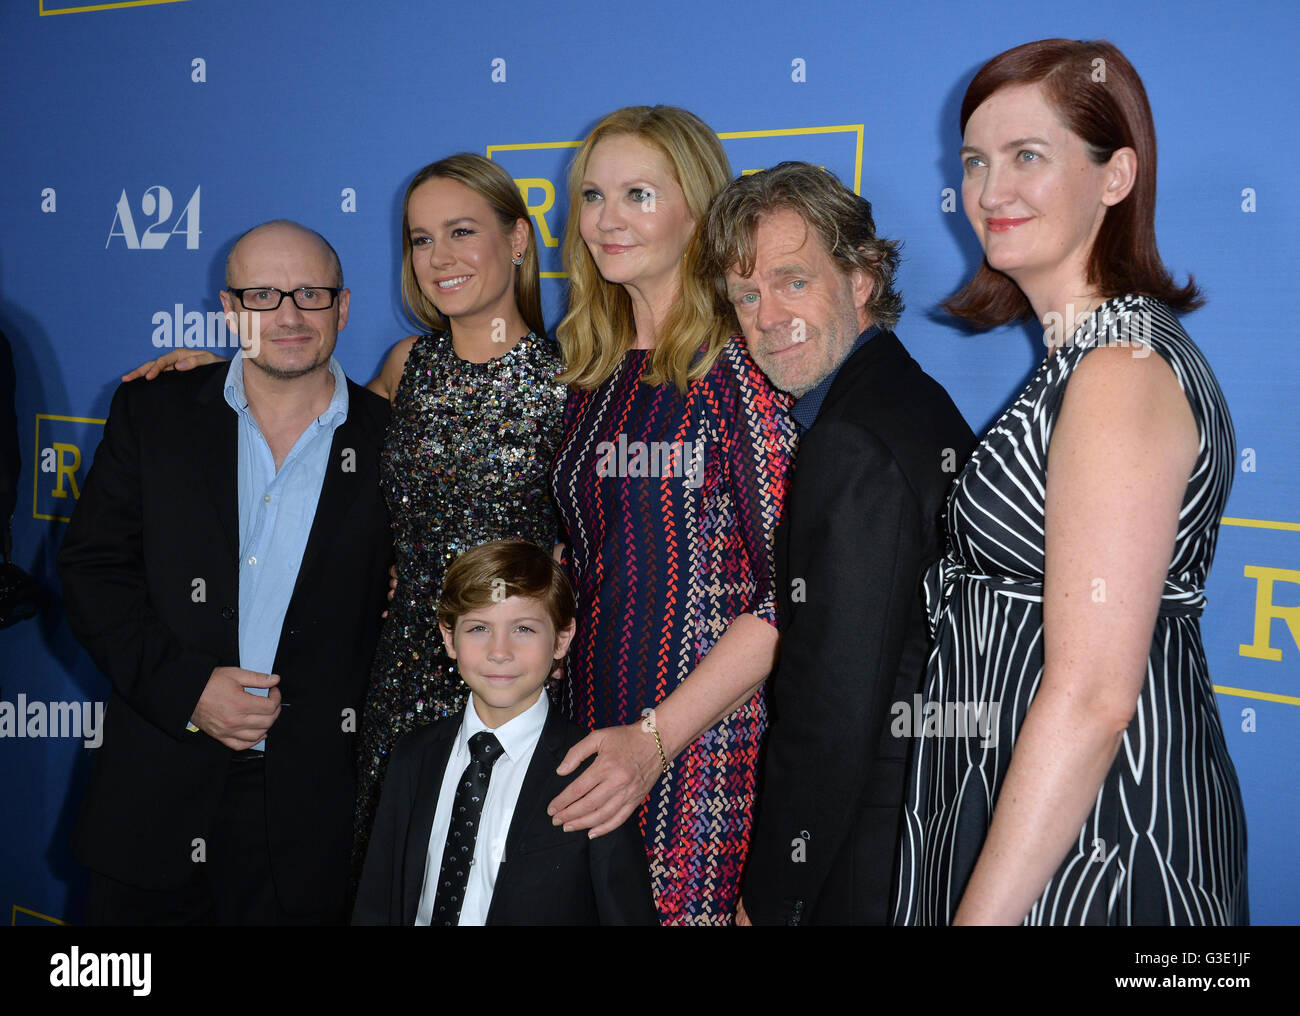 LOS ANGELES, CA - OCTOBER 13, 2015: Actors William H. Macy, Brie Larson, Joan Allen & Jacob Tremblay & director Lenny Abrahmson & screenwriter Emma Donogue at the Los Angeles premiere of their movie 'Room' at the Pacific Design Centre, West Hollywood. Stock Photo